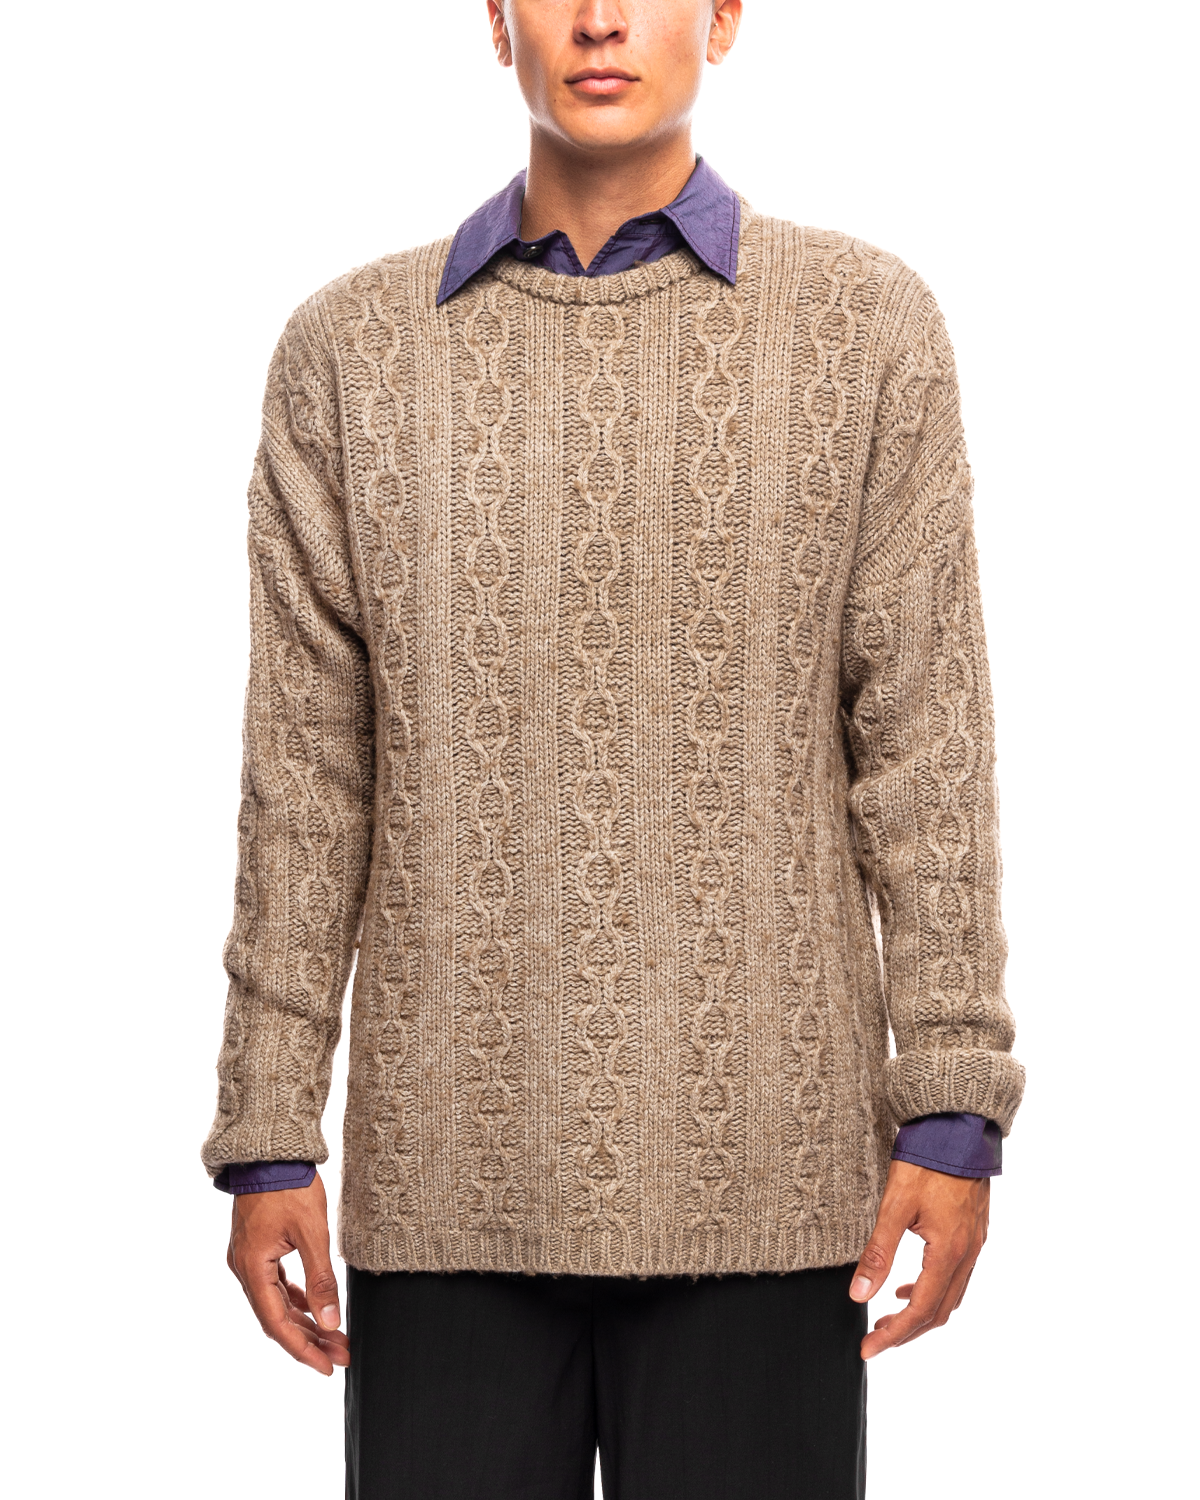 Popover Roundneck Peafowl Funky Chain Knit